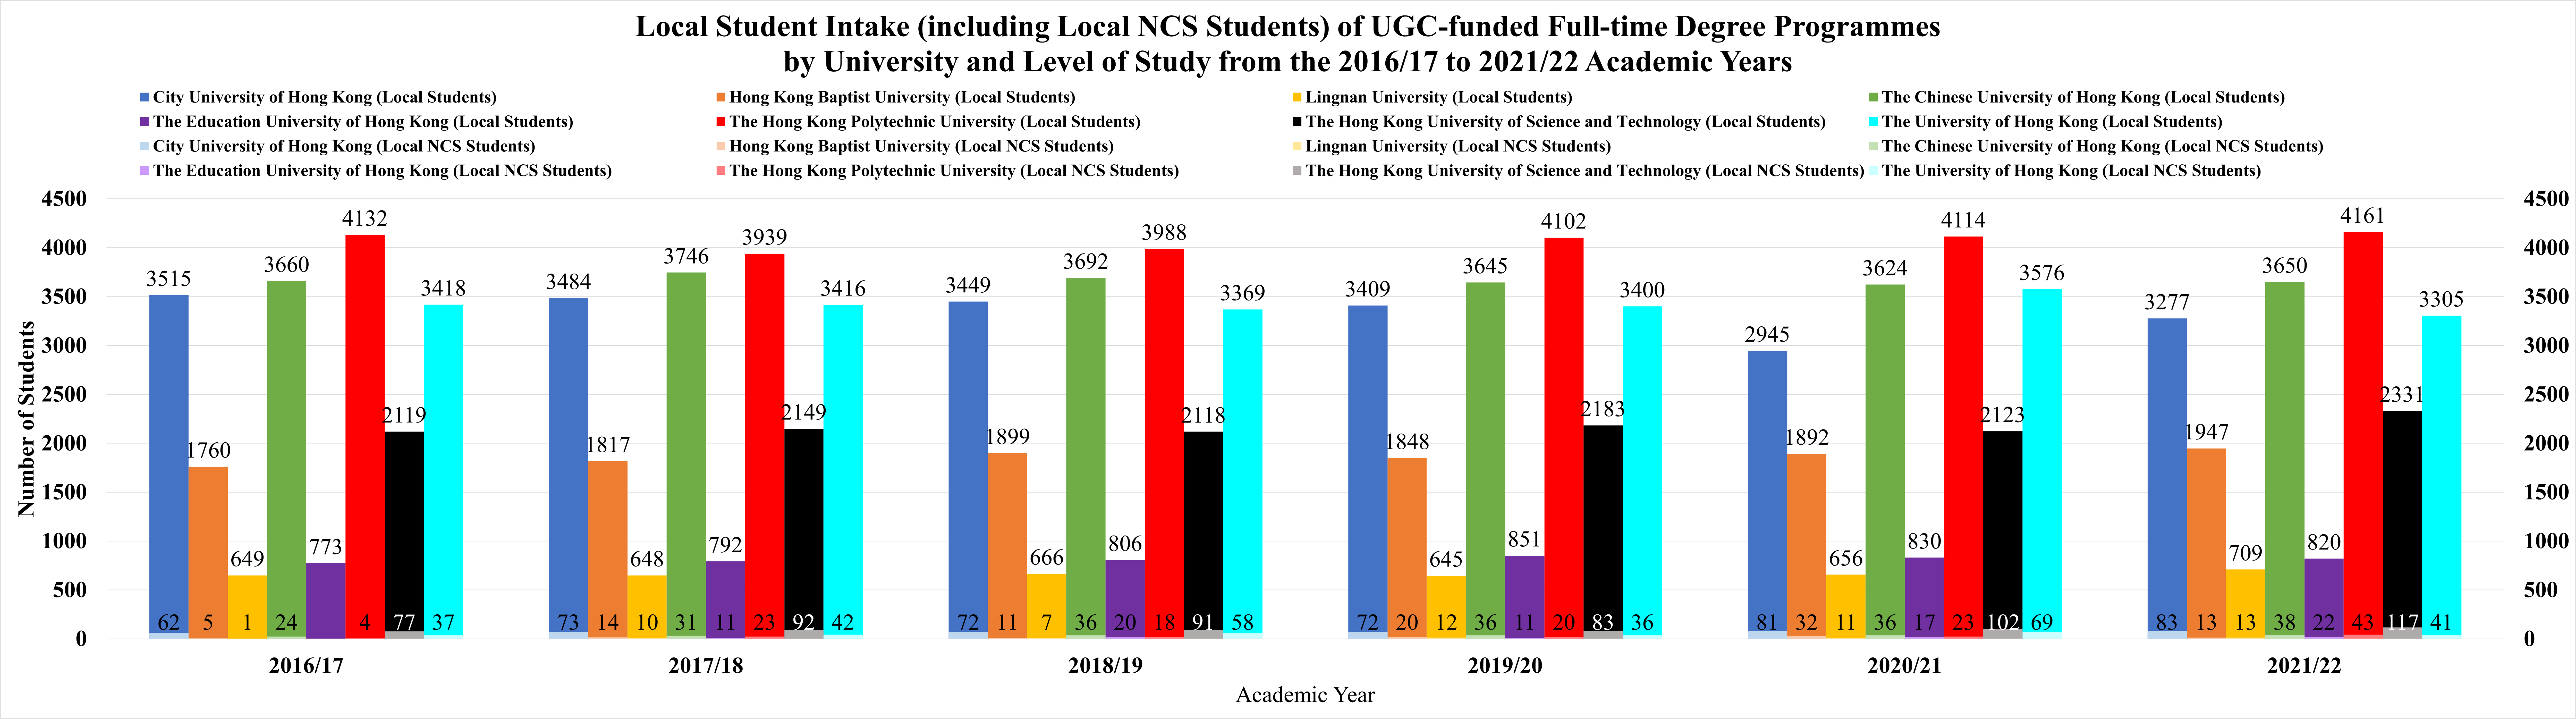 Local Student Intake (including Local NCS Students) of UGC-funded Full-time Degree Programmes (201617-202122)